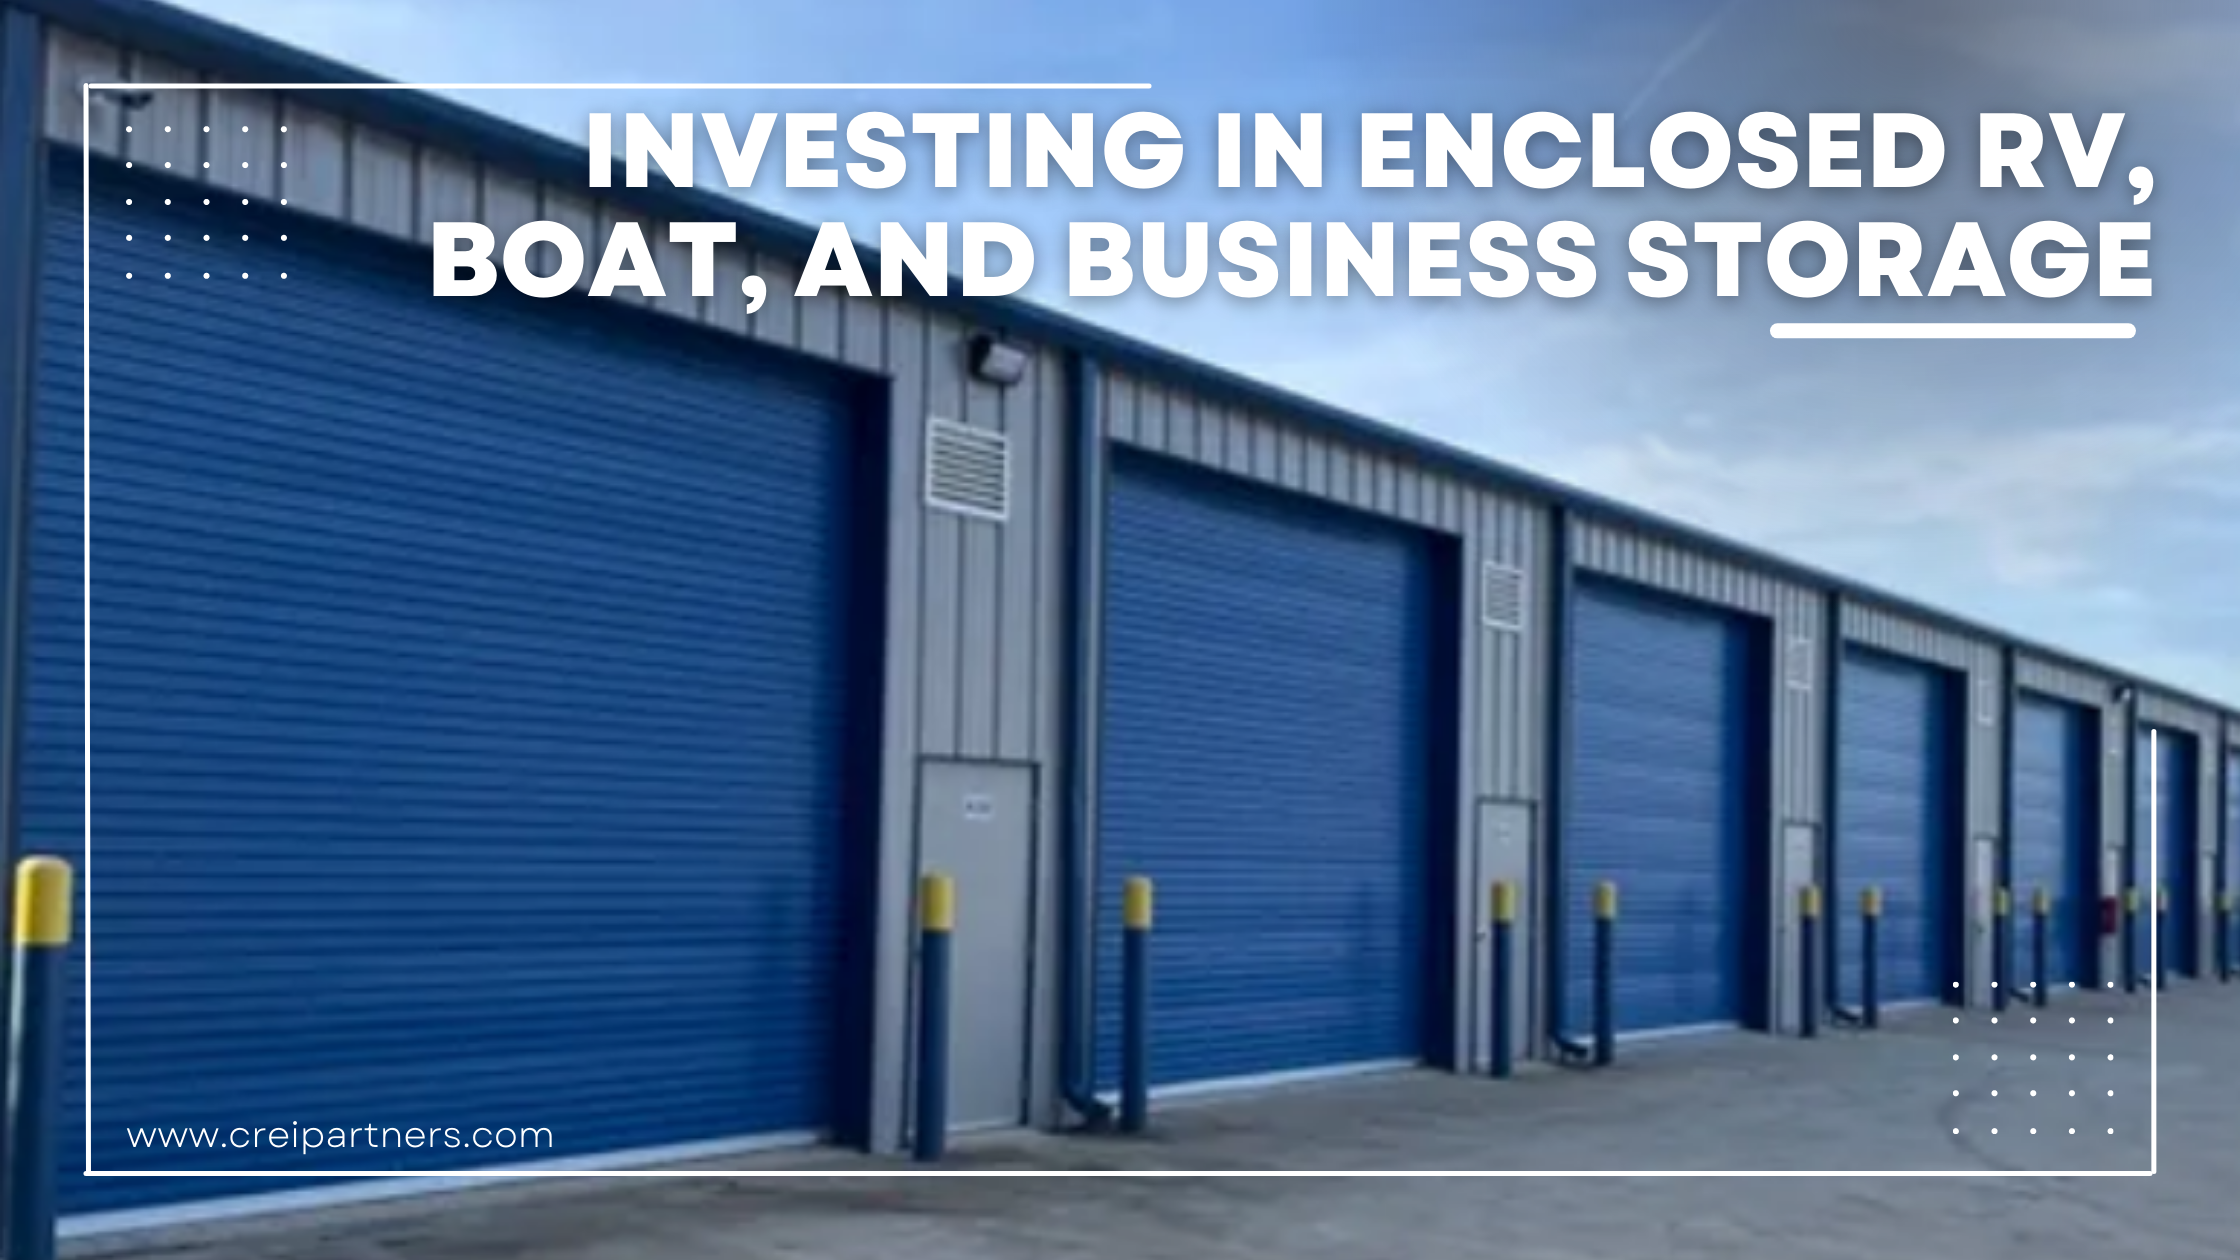 Investing in Enclosed RV, Boat, and Business Storage